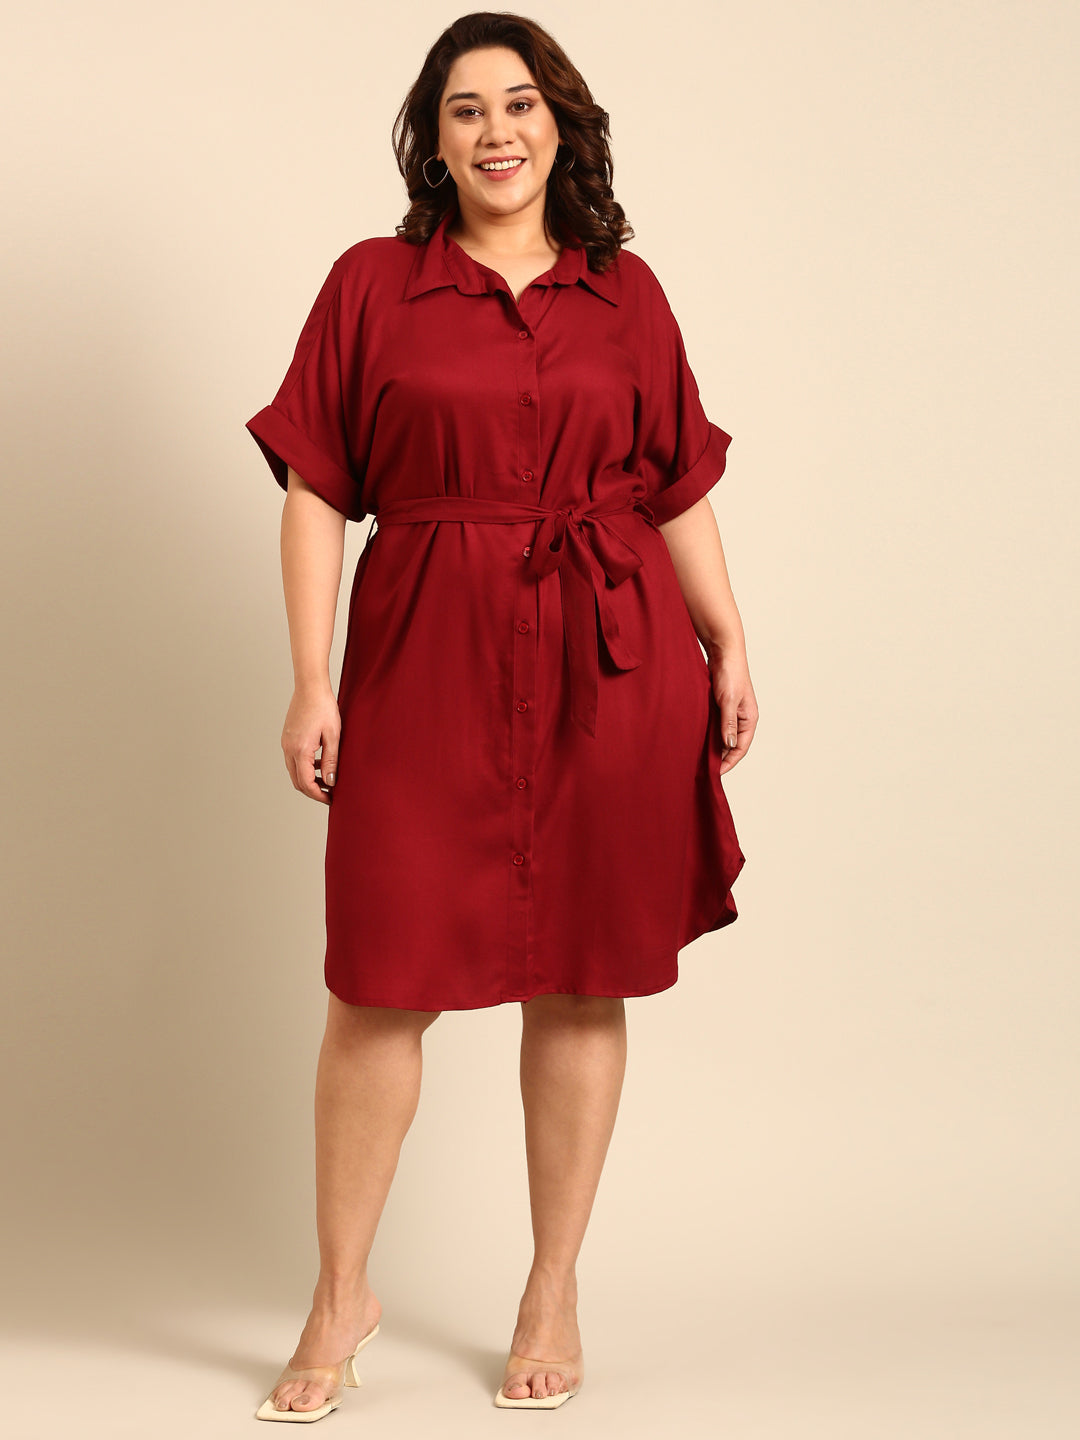 fcity.in - Maroon Maxi Dress Short Sleeves Round Neck Plus Size Dresses For